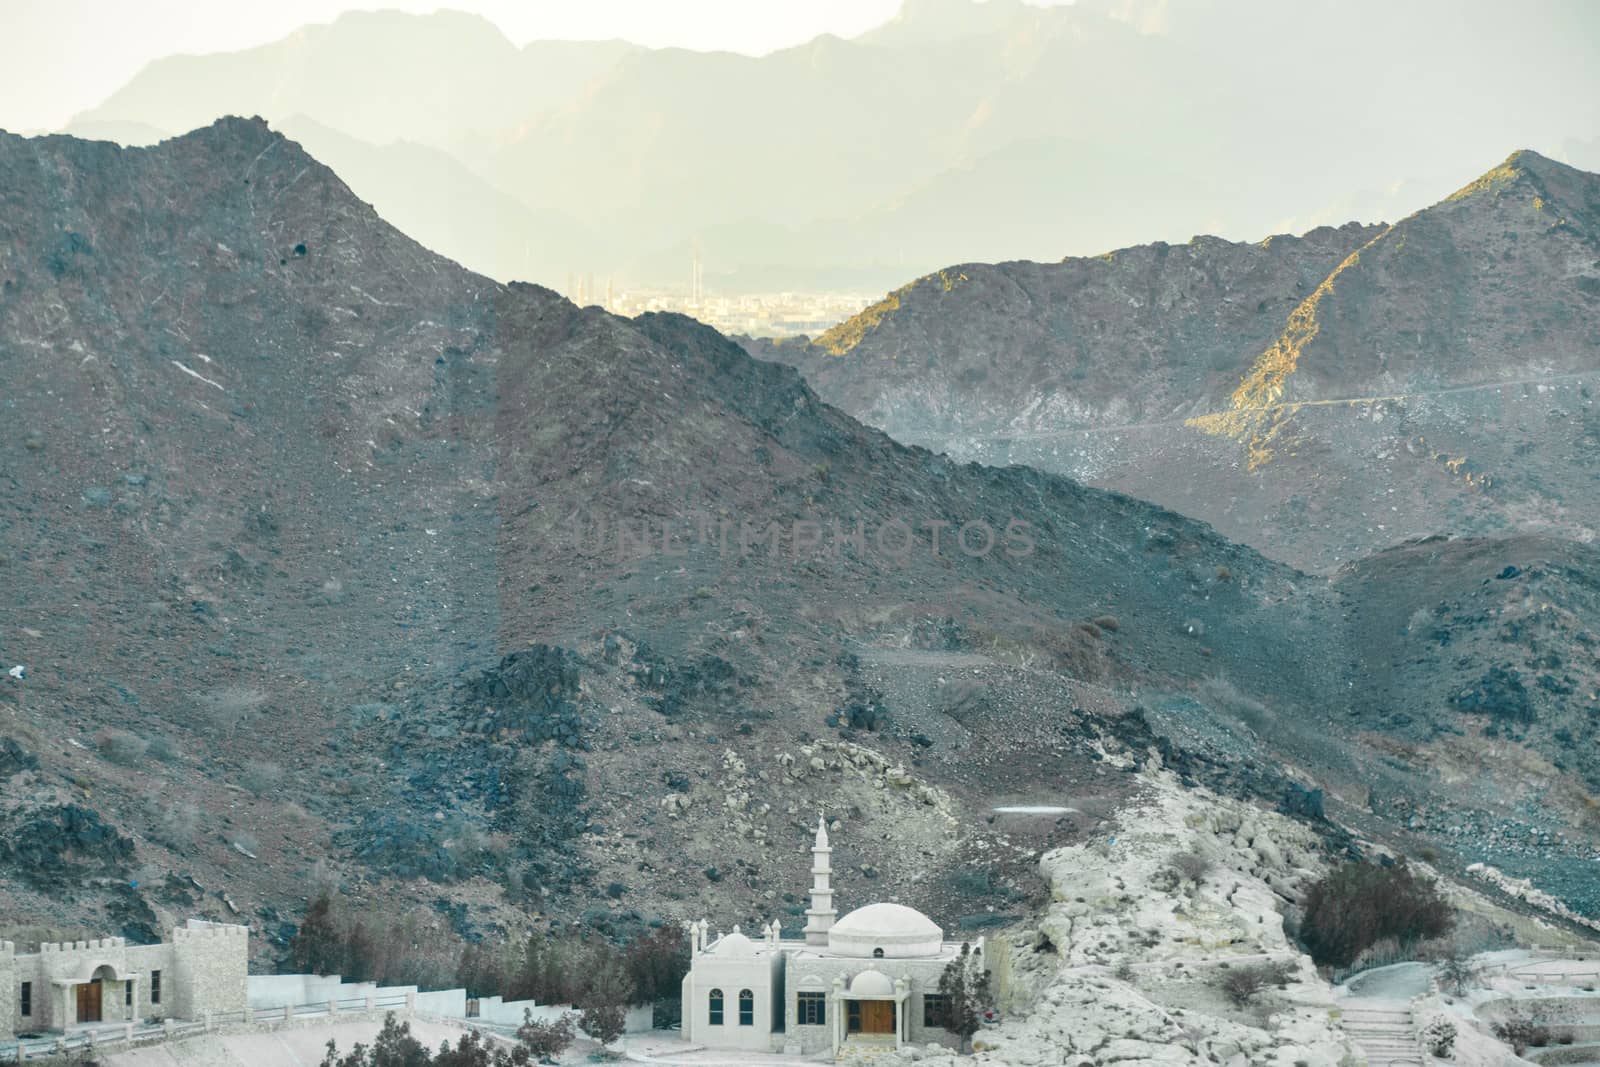 Mosque, place of worship, in the mountains of Fujairah, UAE. Concept of religion and spirituality by dugulan